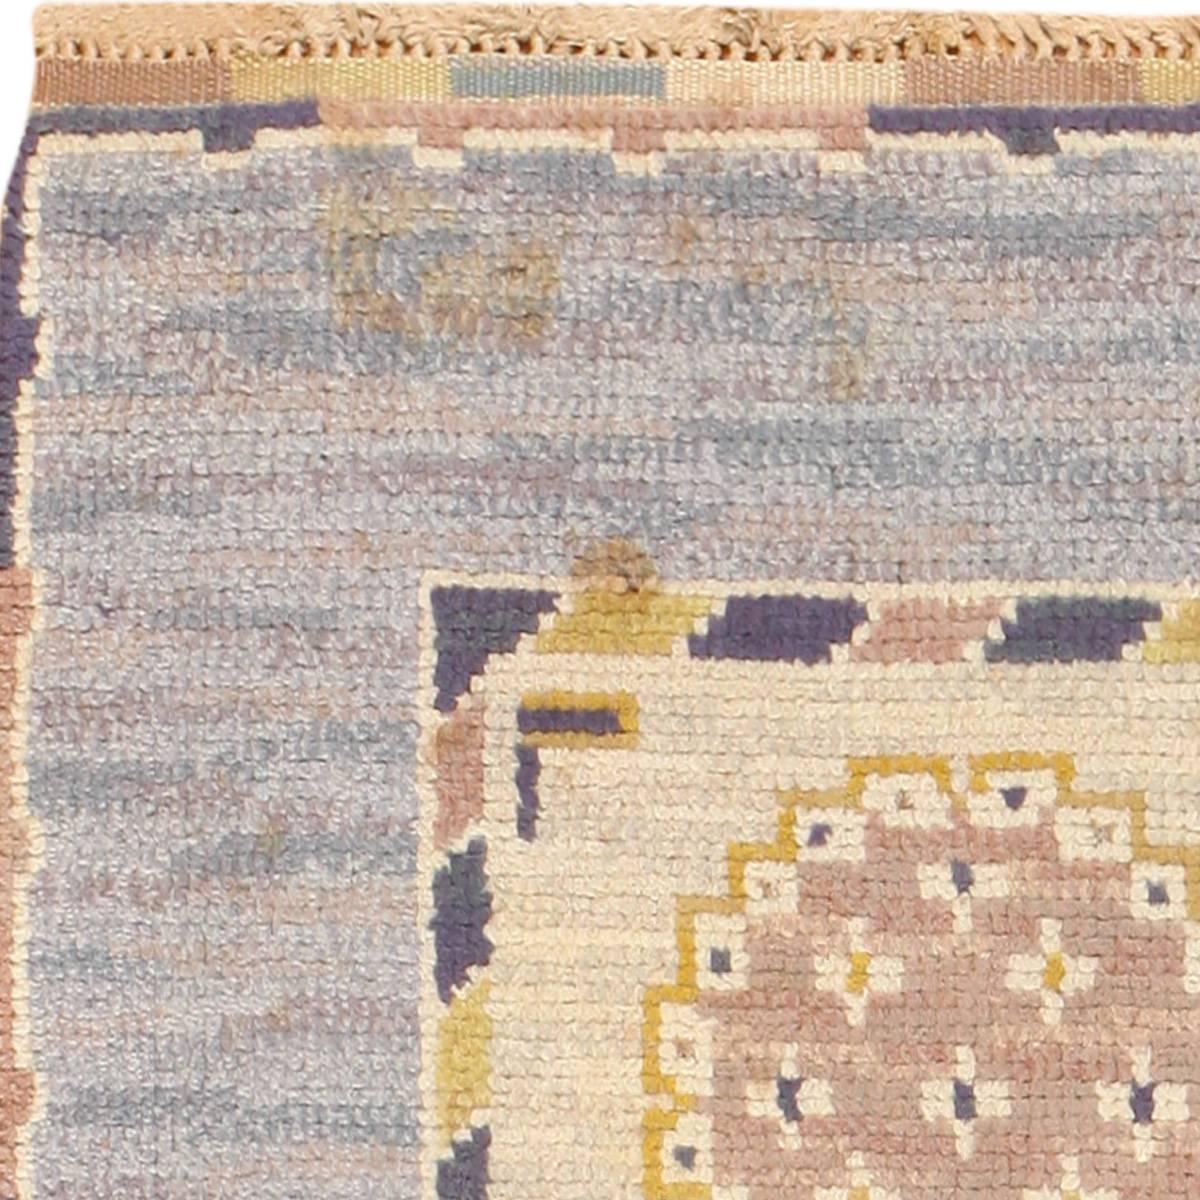 Swedish rugs and carpets have a long history in Scandinavian weaving which reaches right into the Modern period. An established form of Swedish folk weaving, “Rollakans” were used as coverlets or flat woven tapestry rugs. Swedish rugs and carpets